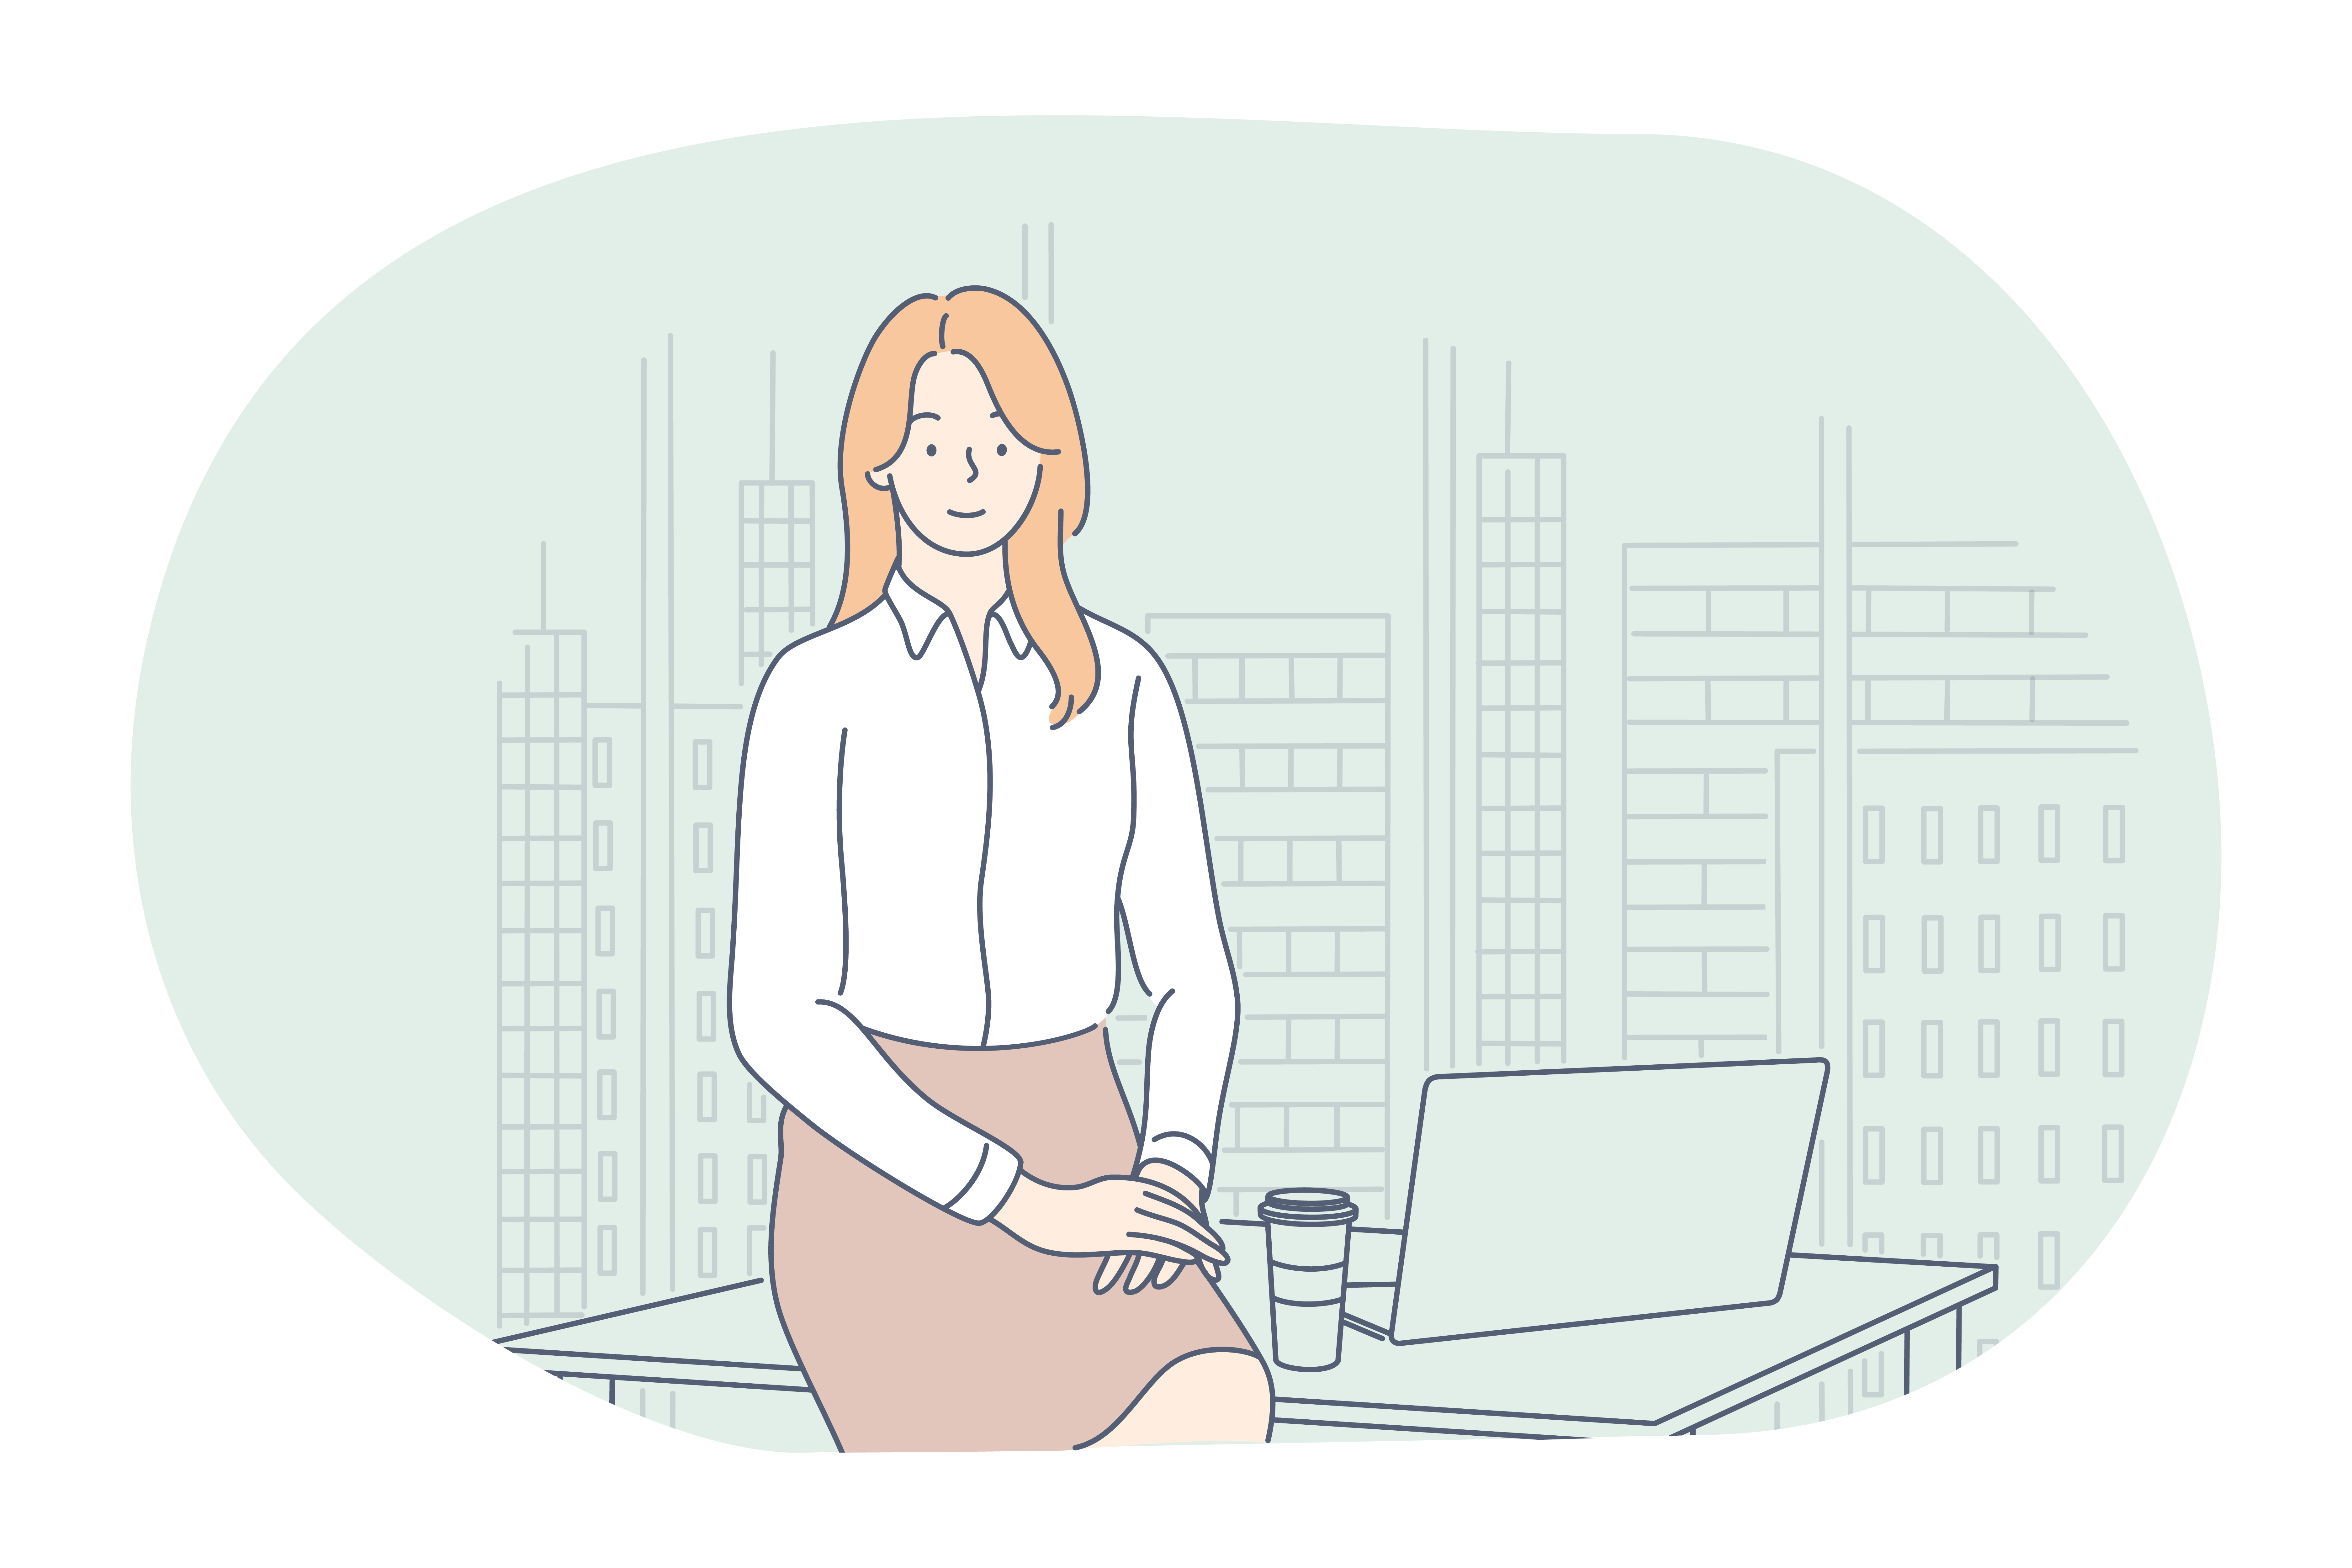 Working in office, modern company interior, online communication concept. Young smiling woman cartoon character sitting on workplace, working on notebook, communicating, thinking about work. Working in office, modern company interior, online communication concept